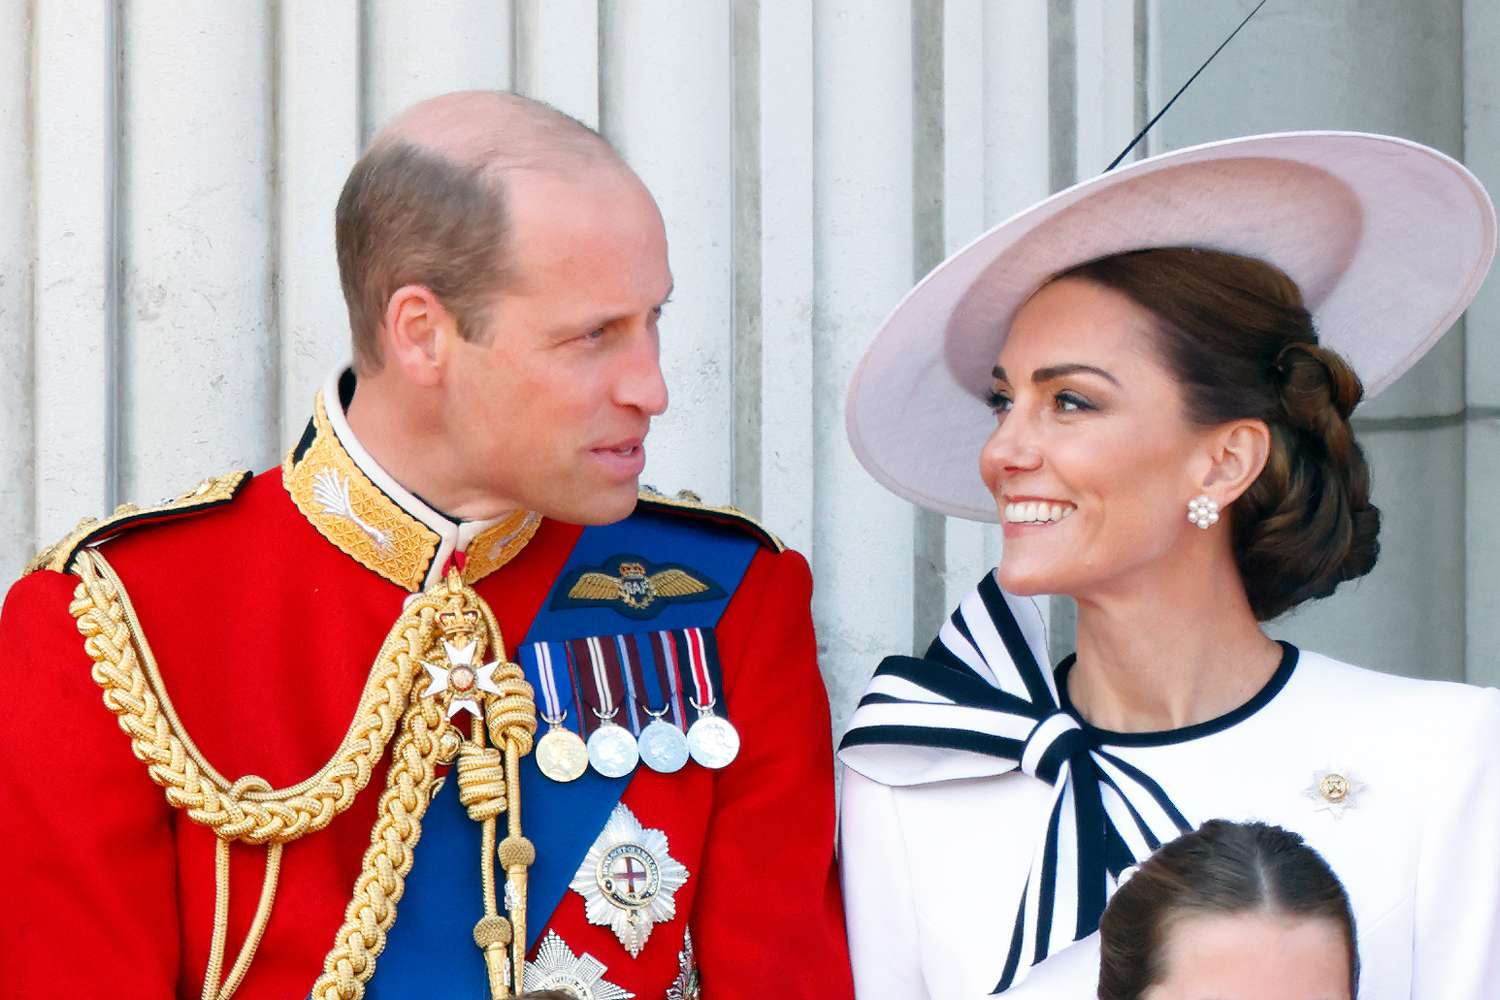 Kate Middleton and Prince William ‘Command Secrecy’ amid Cancer (Exclusive) [Video]